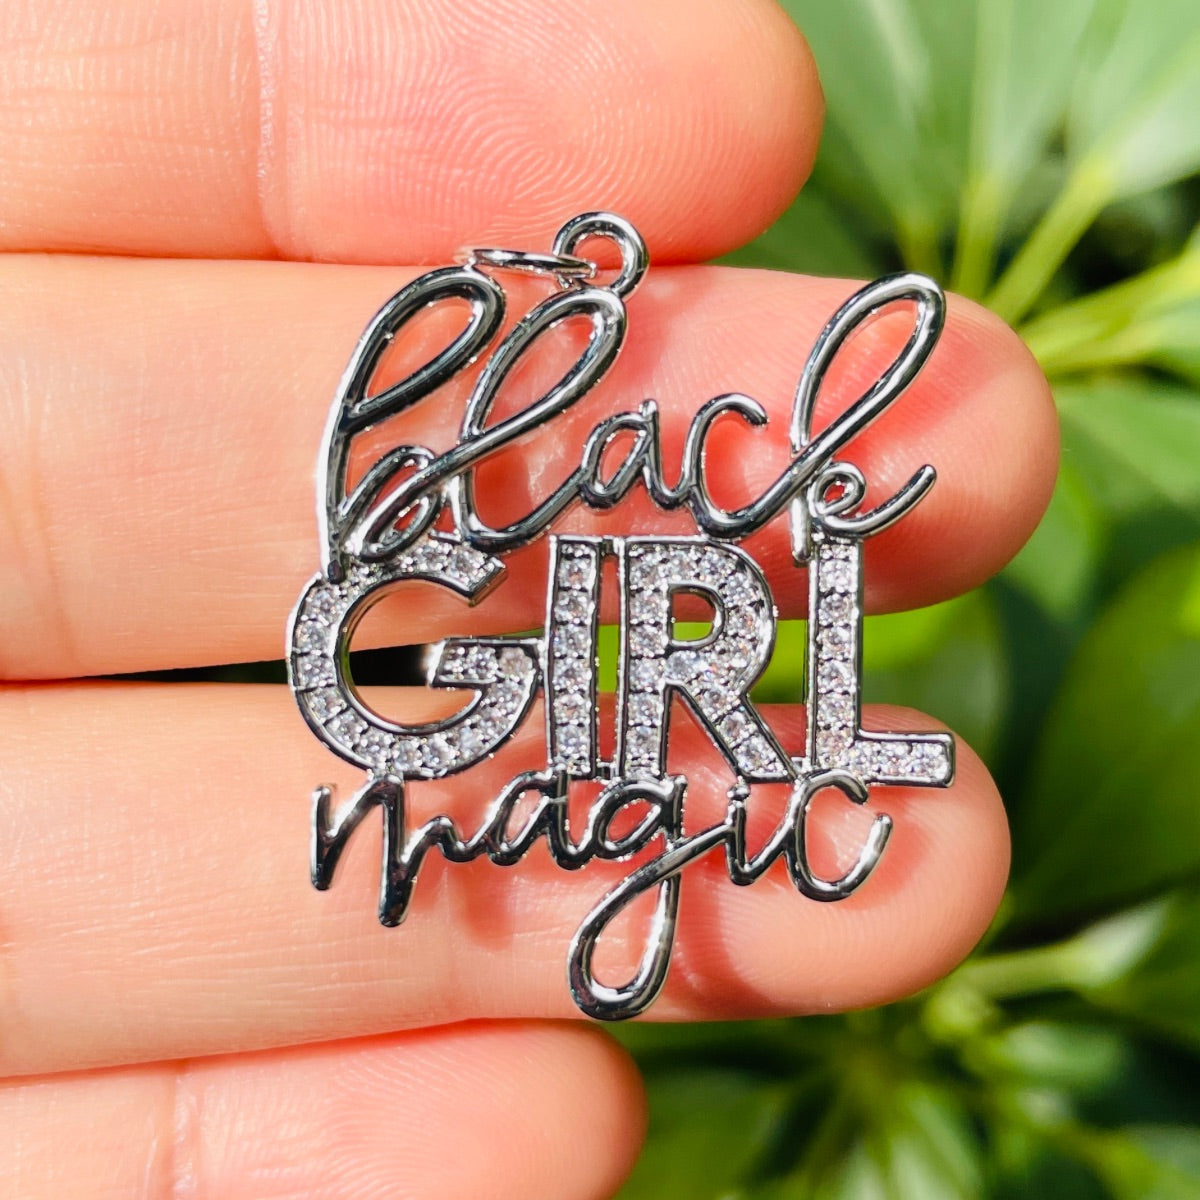 10pcs/lot CZ Paved Black Girl Magic Charms CZ Paved Charms New Charms Arrivals Words & Quotes Charms Beads Beyond